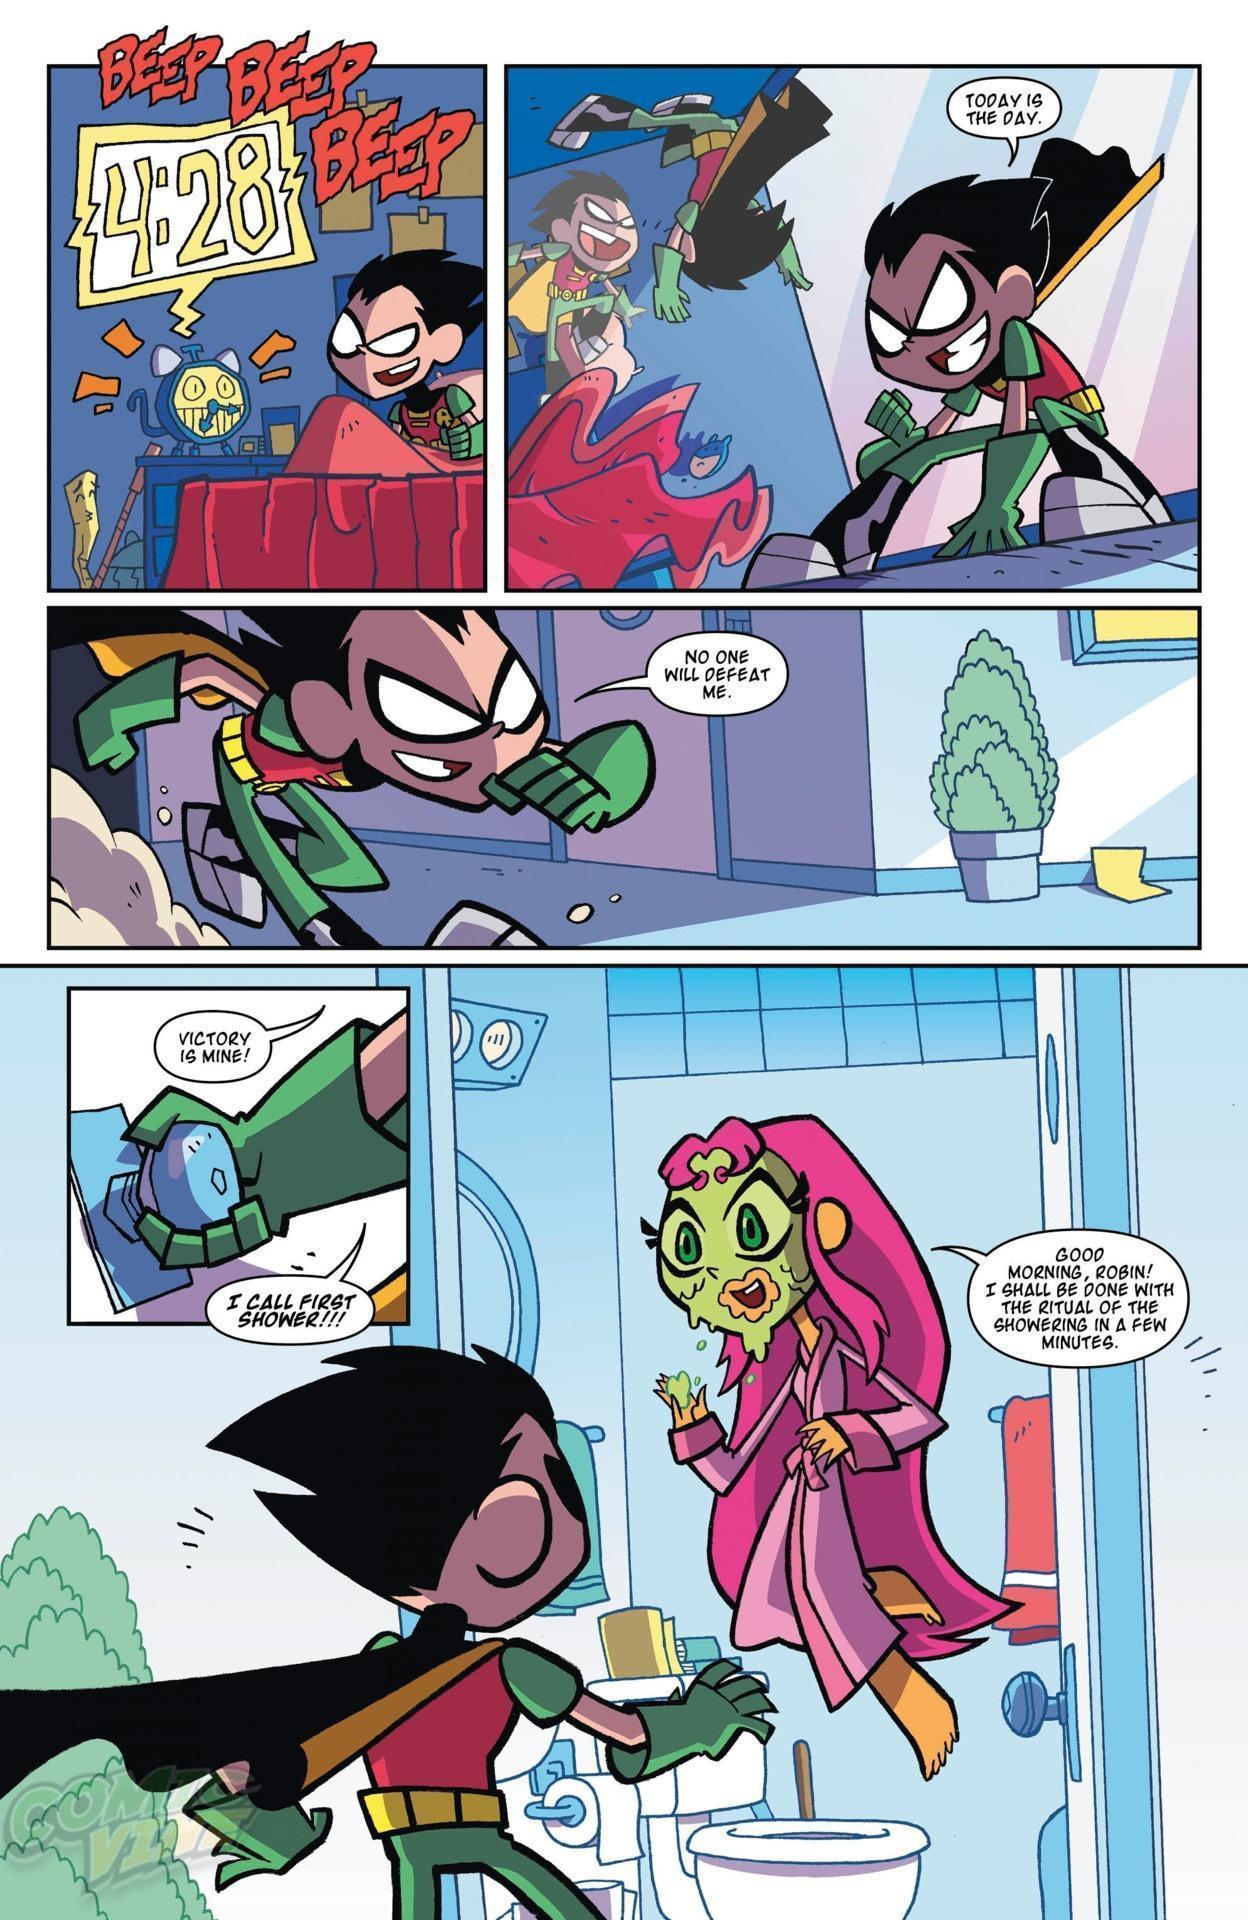 Latest Issue Of Teen Titans Go Series Now Available From DC Comics